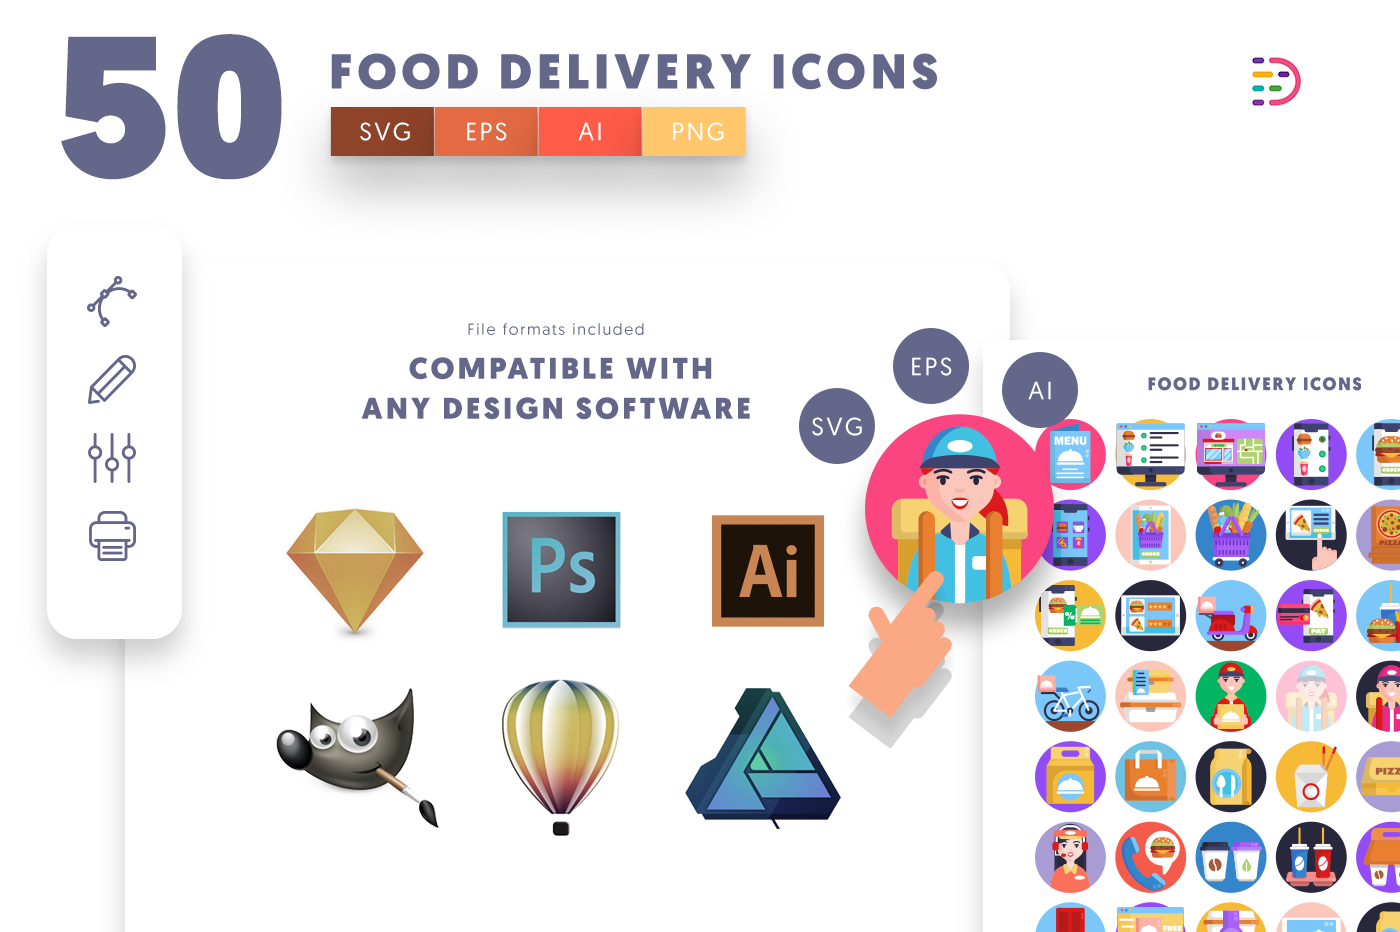  full vector Food Delivery Icons